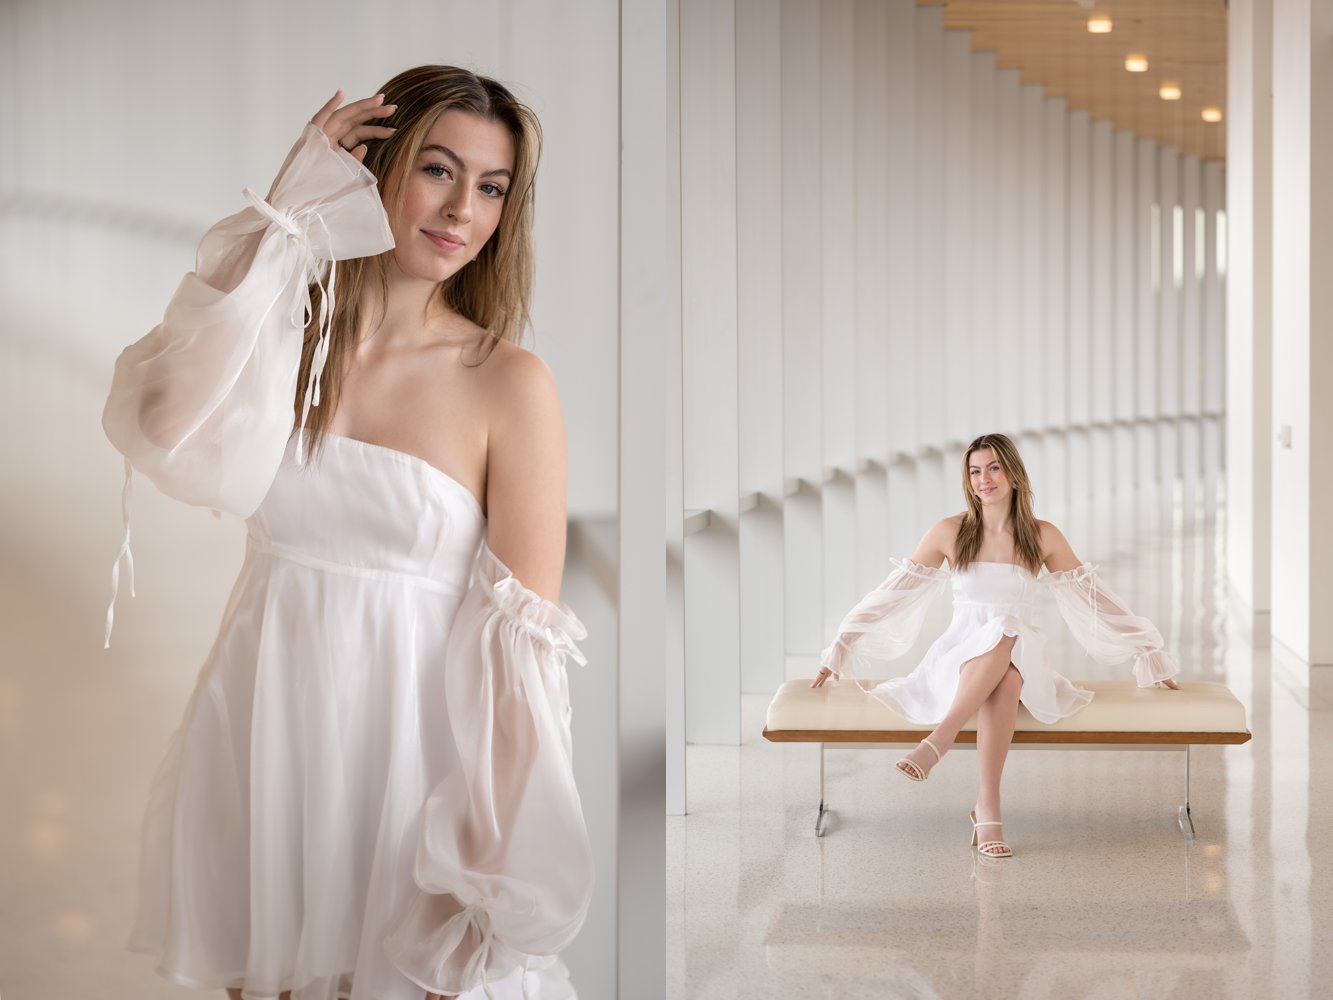 Hancher's light and airy hallway with beautiful lines accentuate Annie's soft and feminine dress and dance poses for her Cedar Rapids Senior Pictures